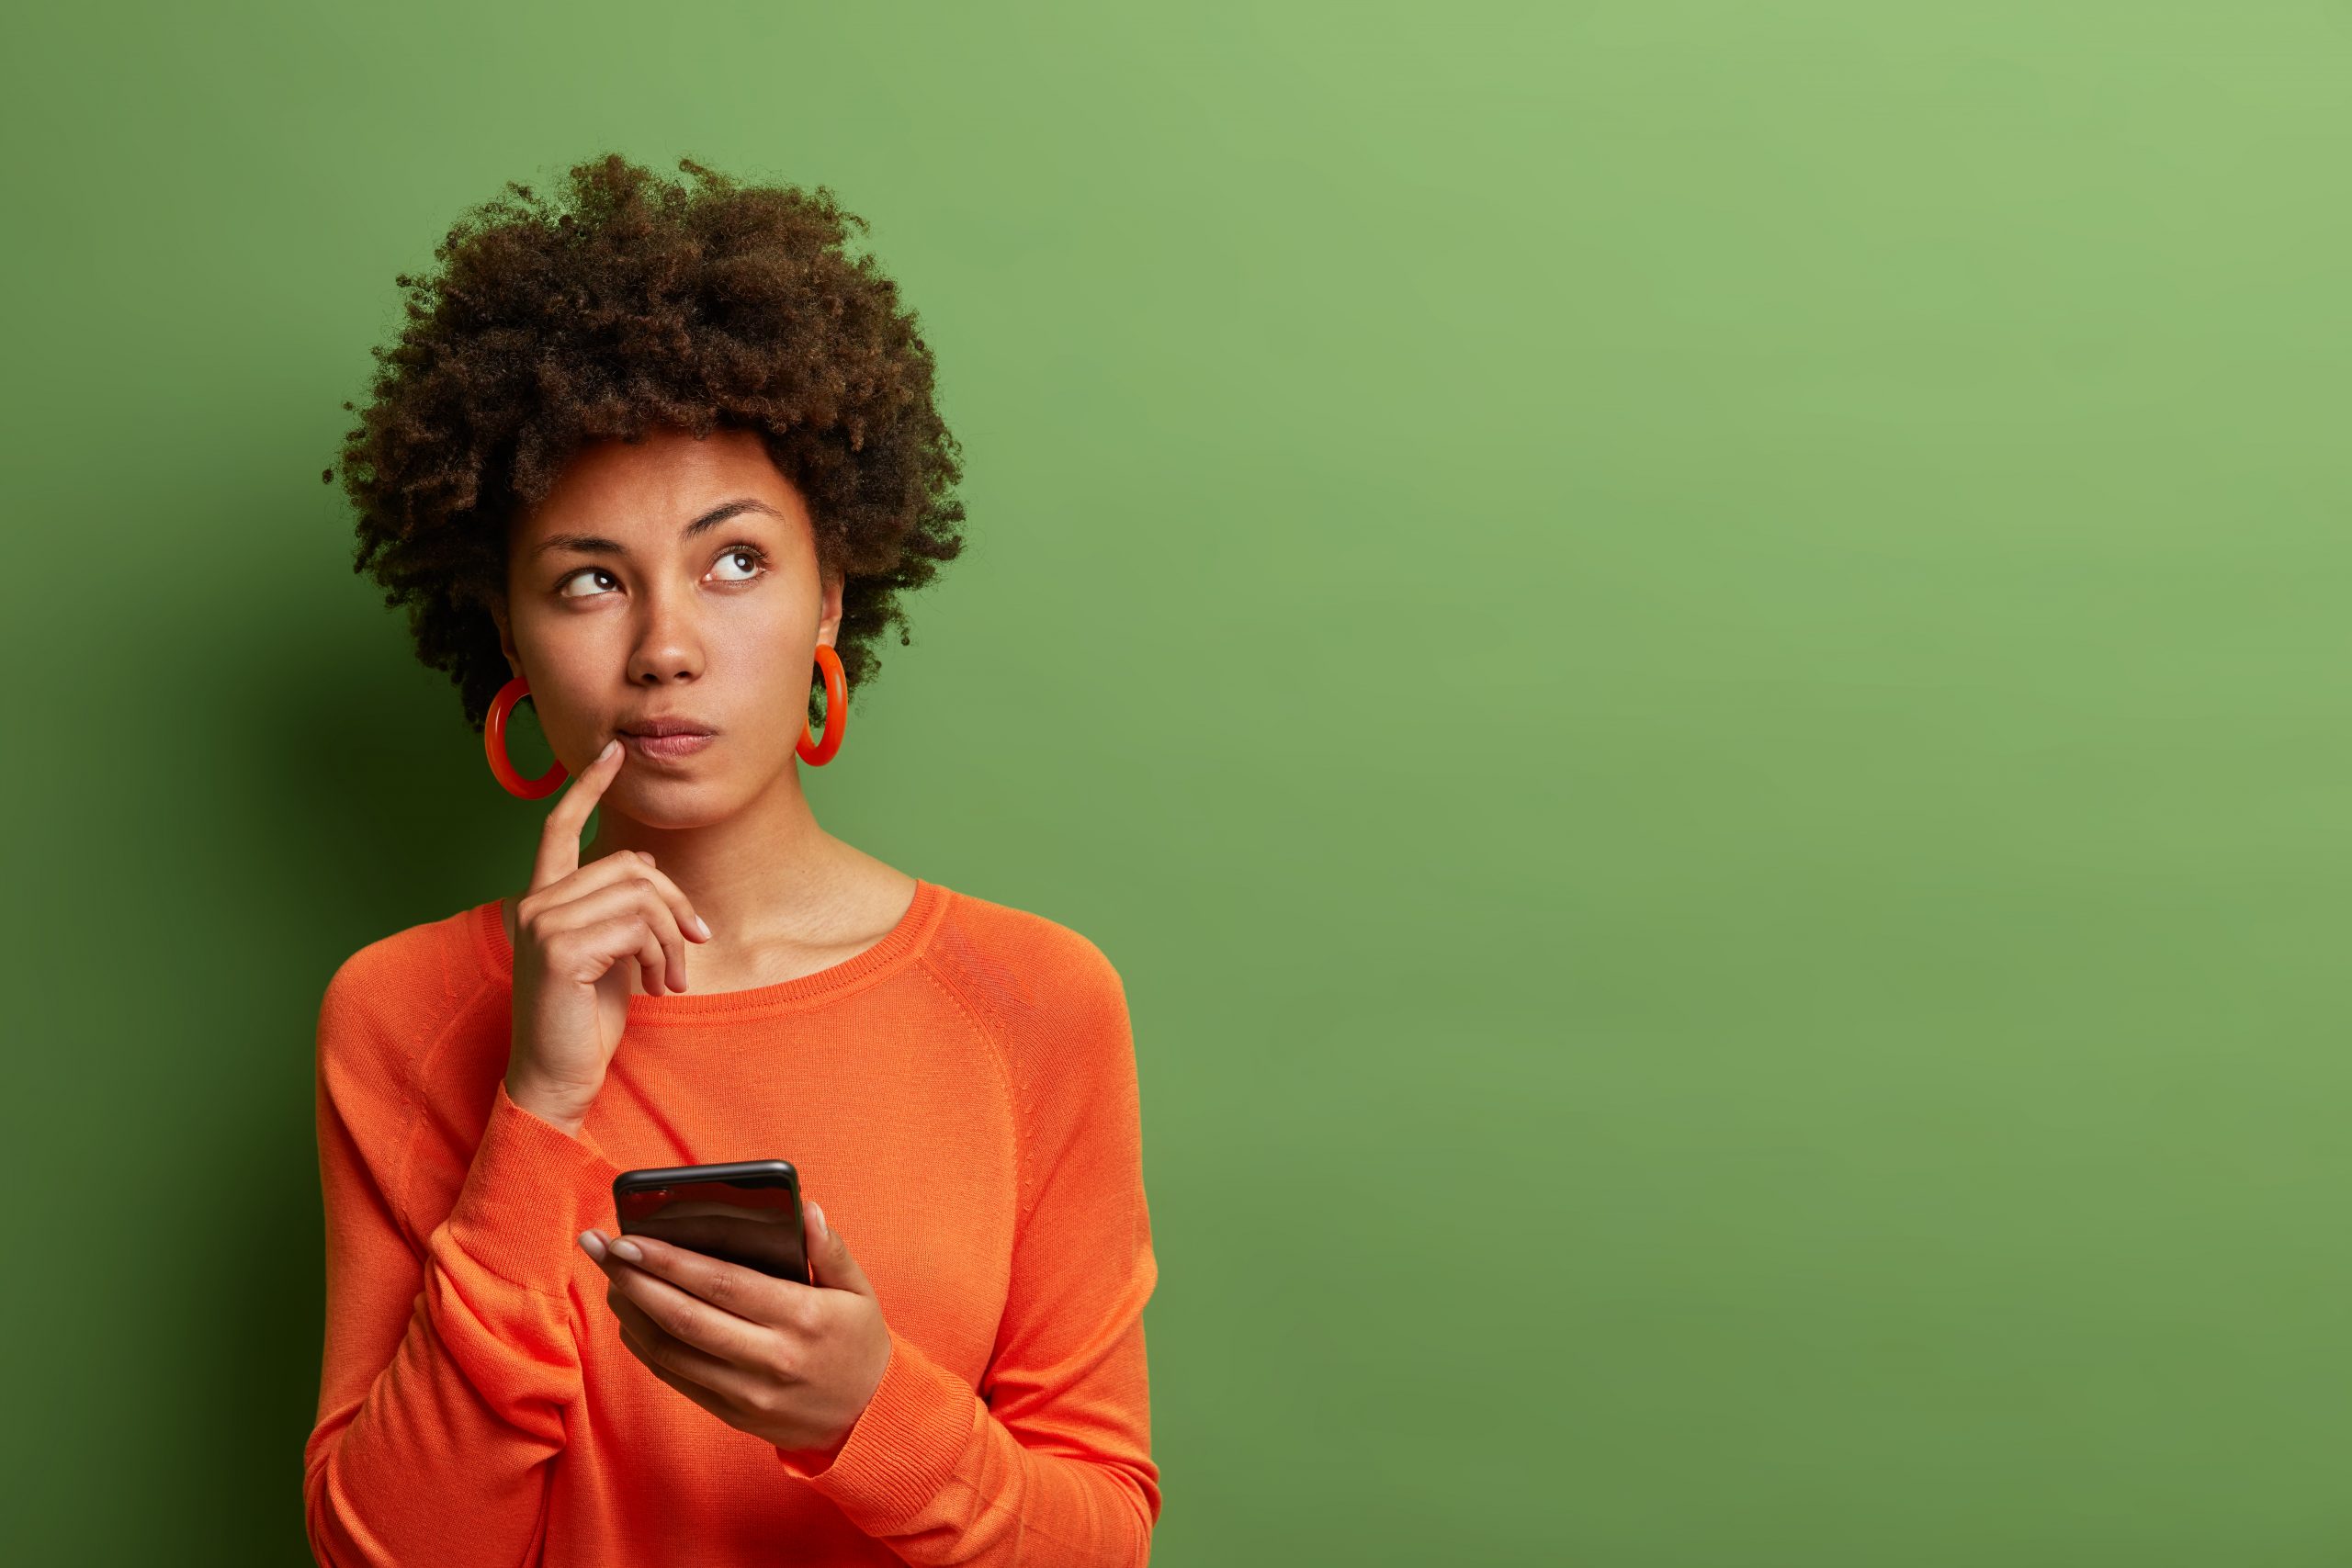 photo-of-pretty-ethnic-woman-ponders-on-how-to-answer-question-thinks-deeply-about-something-uses-modern-mobile-phone-tries-to-made-up-good-message-keeps-index-finger-near-lips-stands-indoor